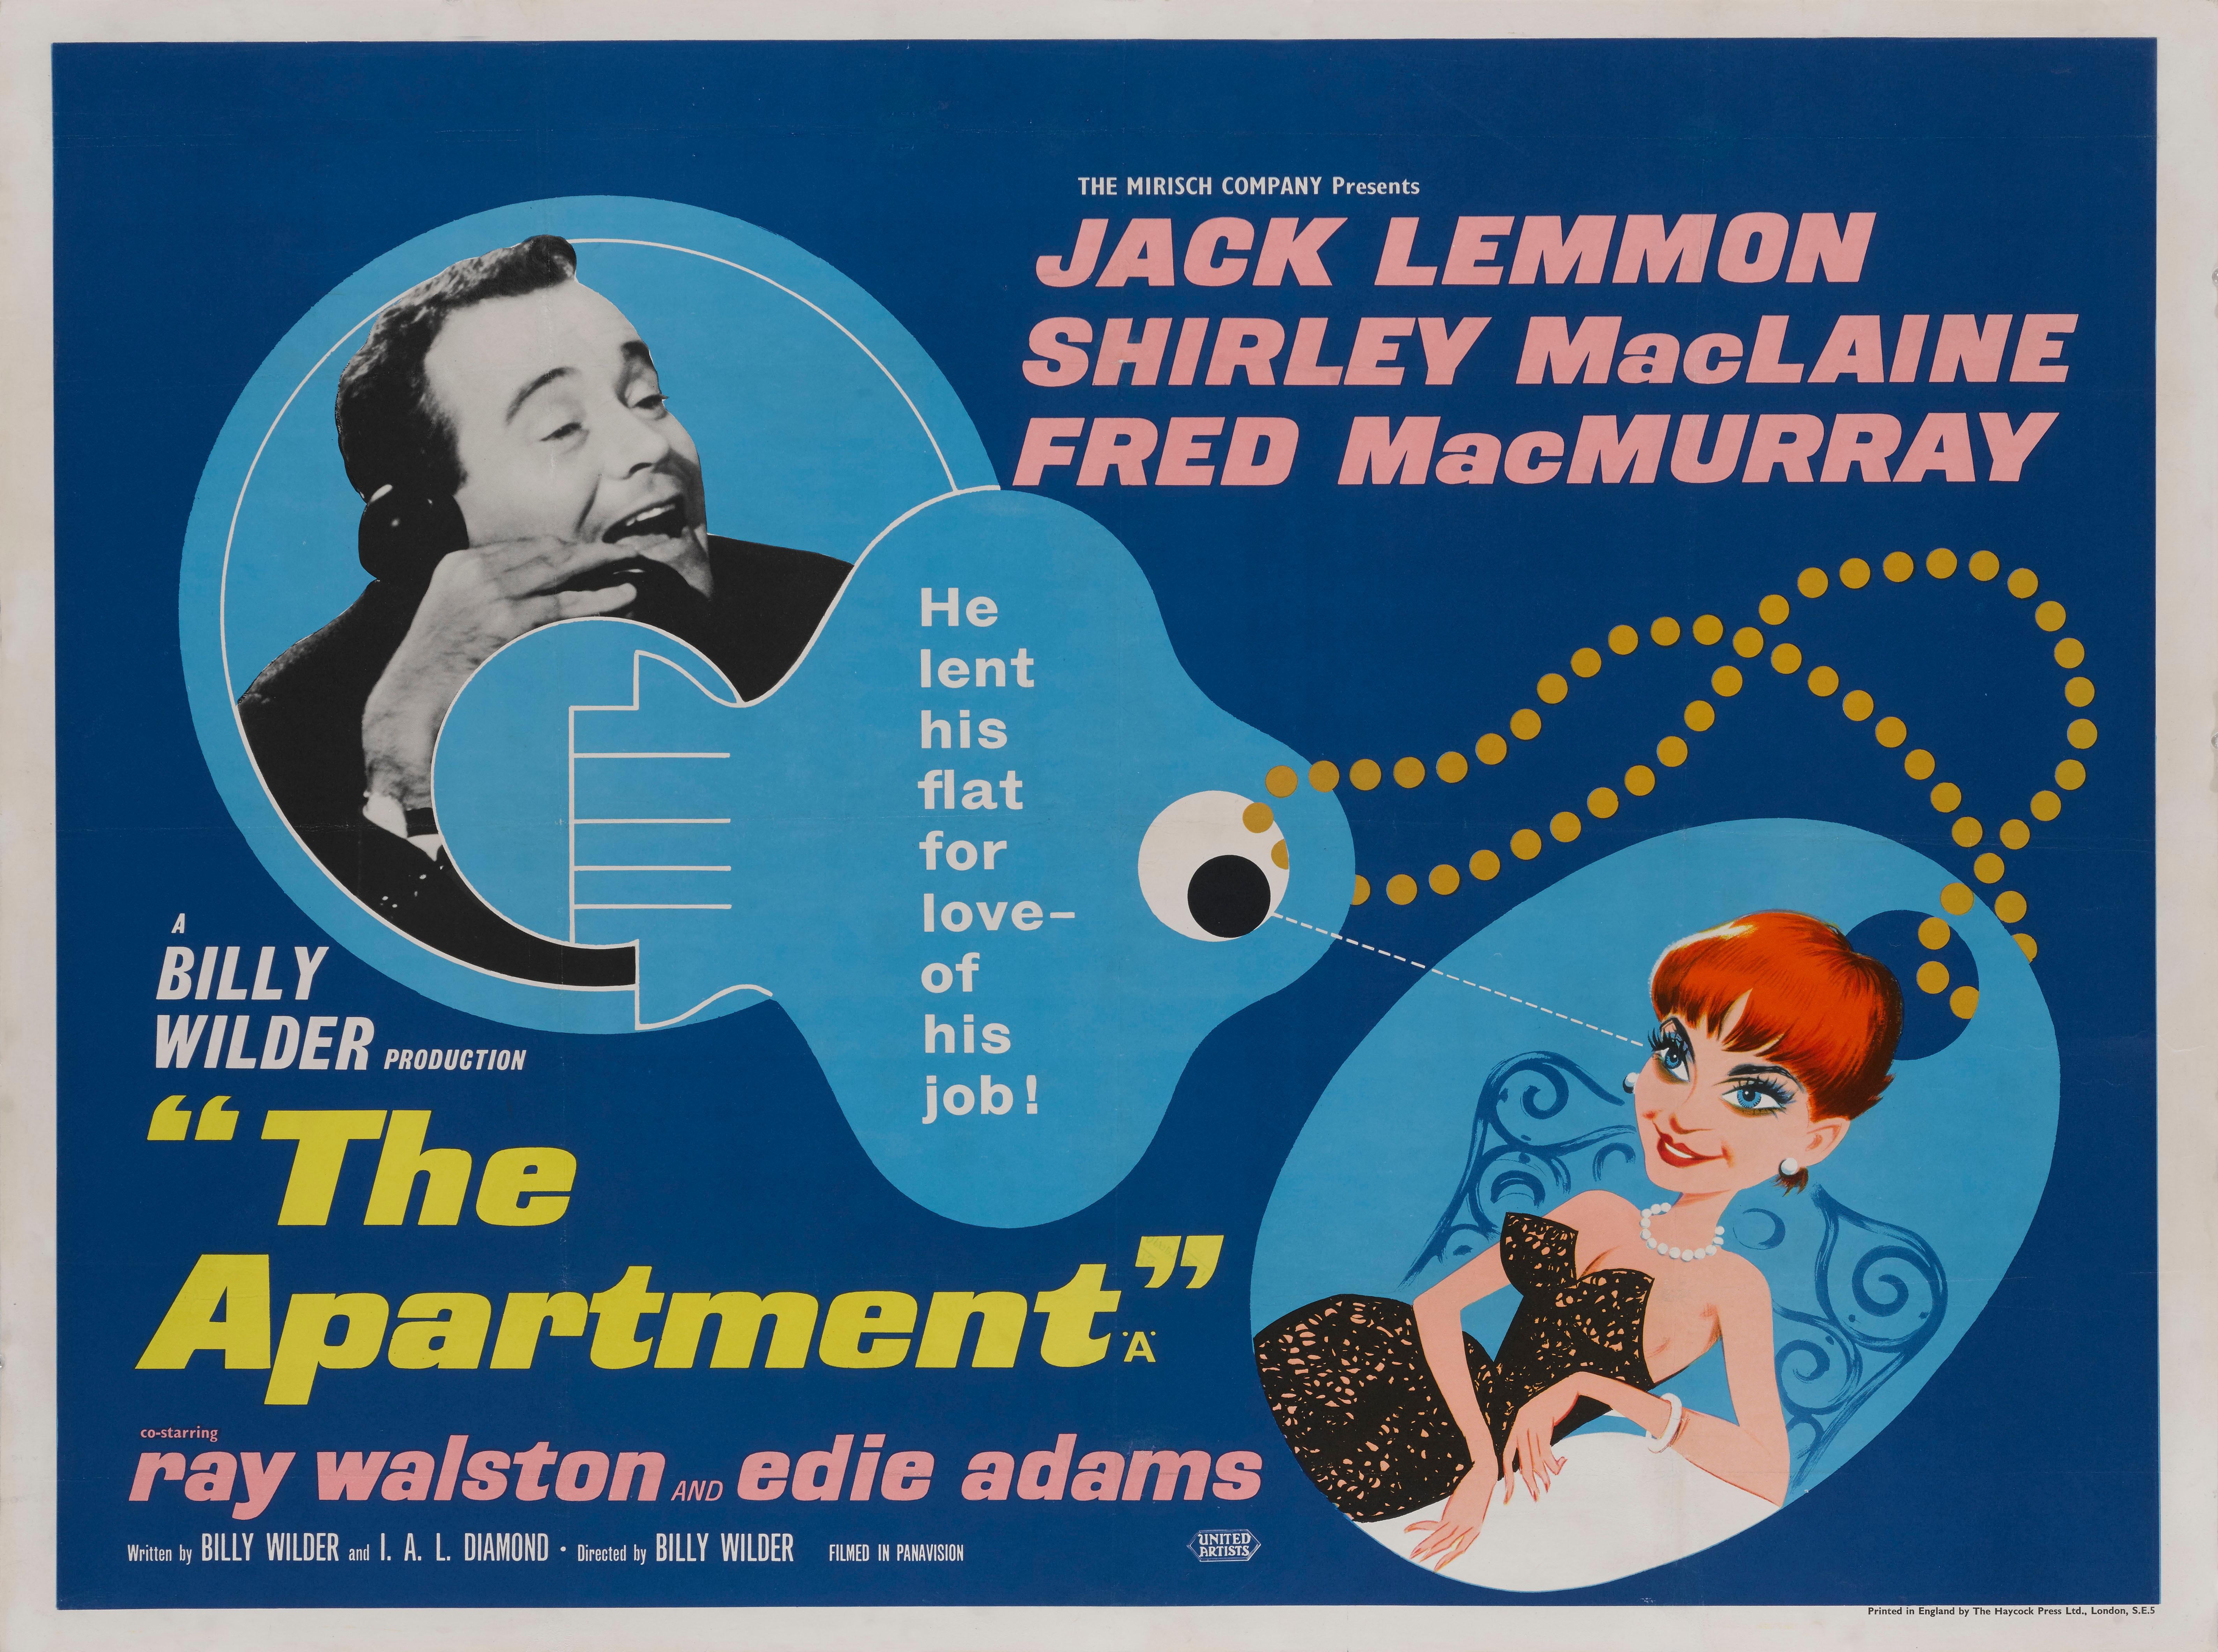 Original British film poster.
This 1960 romantic comedy was produced and directed by Billy Wilder. It stars Jack Lemmon, Shirley MacLaine and Fred MacMurray. This film was nominated for ten academy award ten awards and won five, including best